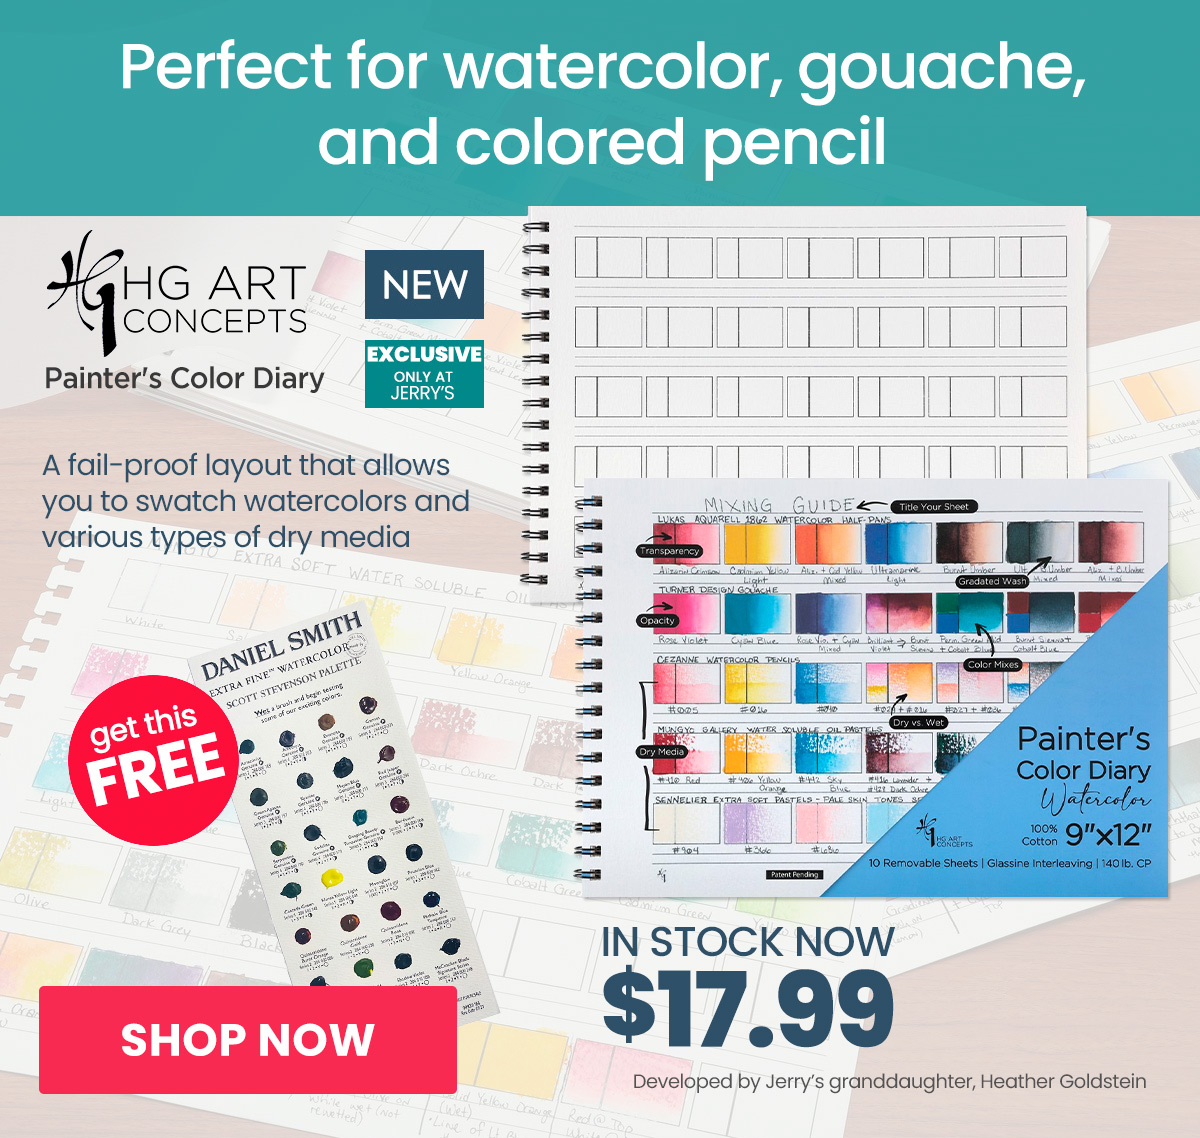 Painter's Color Diary, 9"x12" Watercolor Spiral 140lb Cold Press, 10 Pages